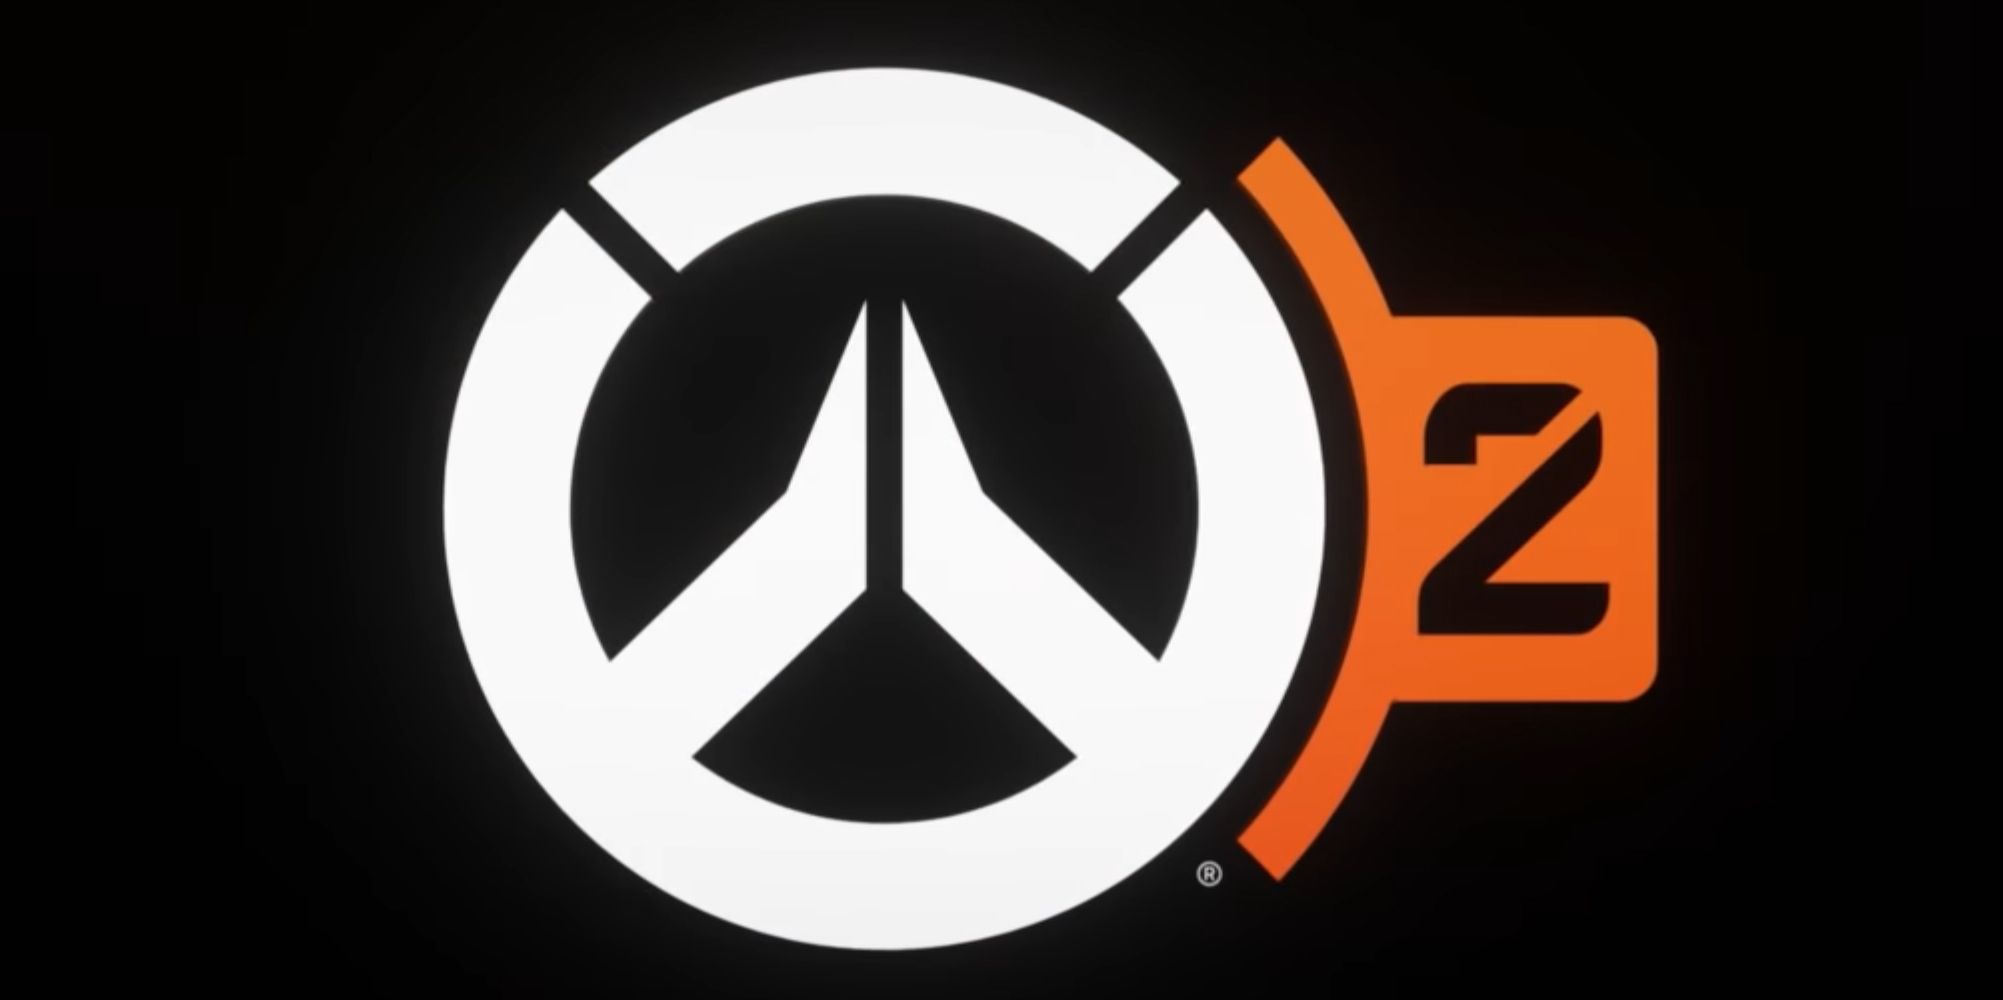 download mei overwatch 2 for free